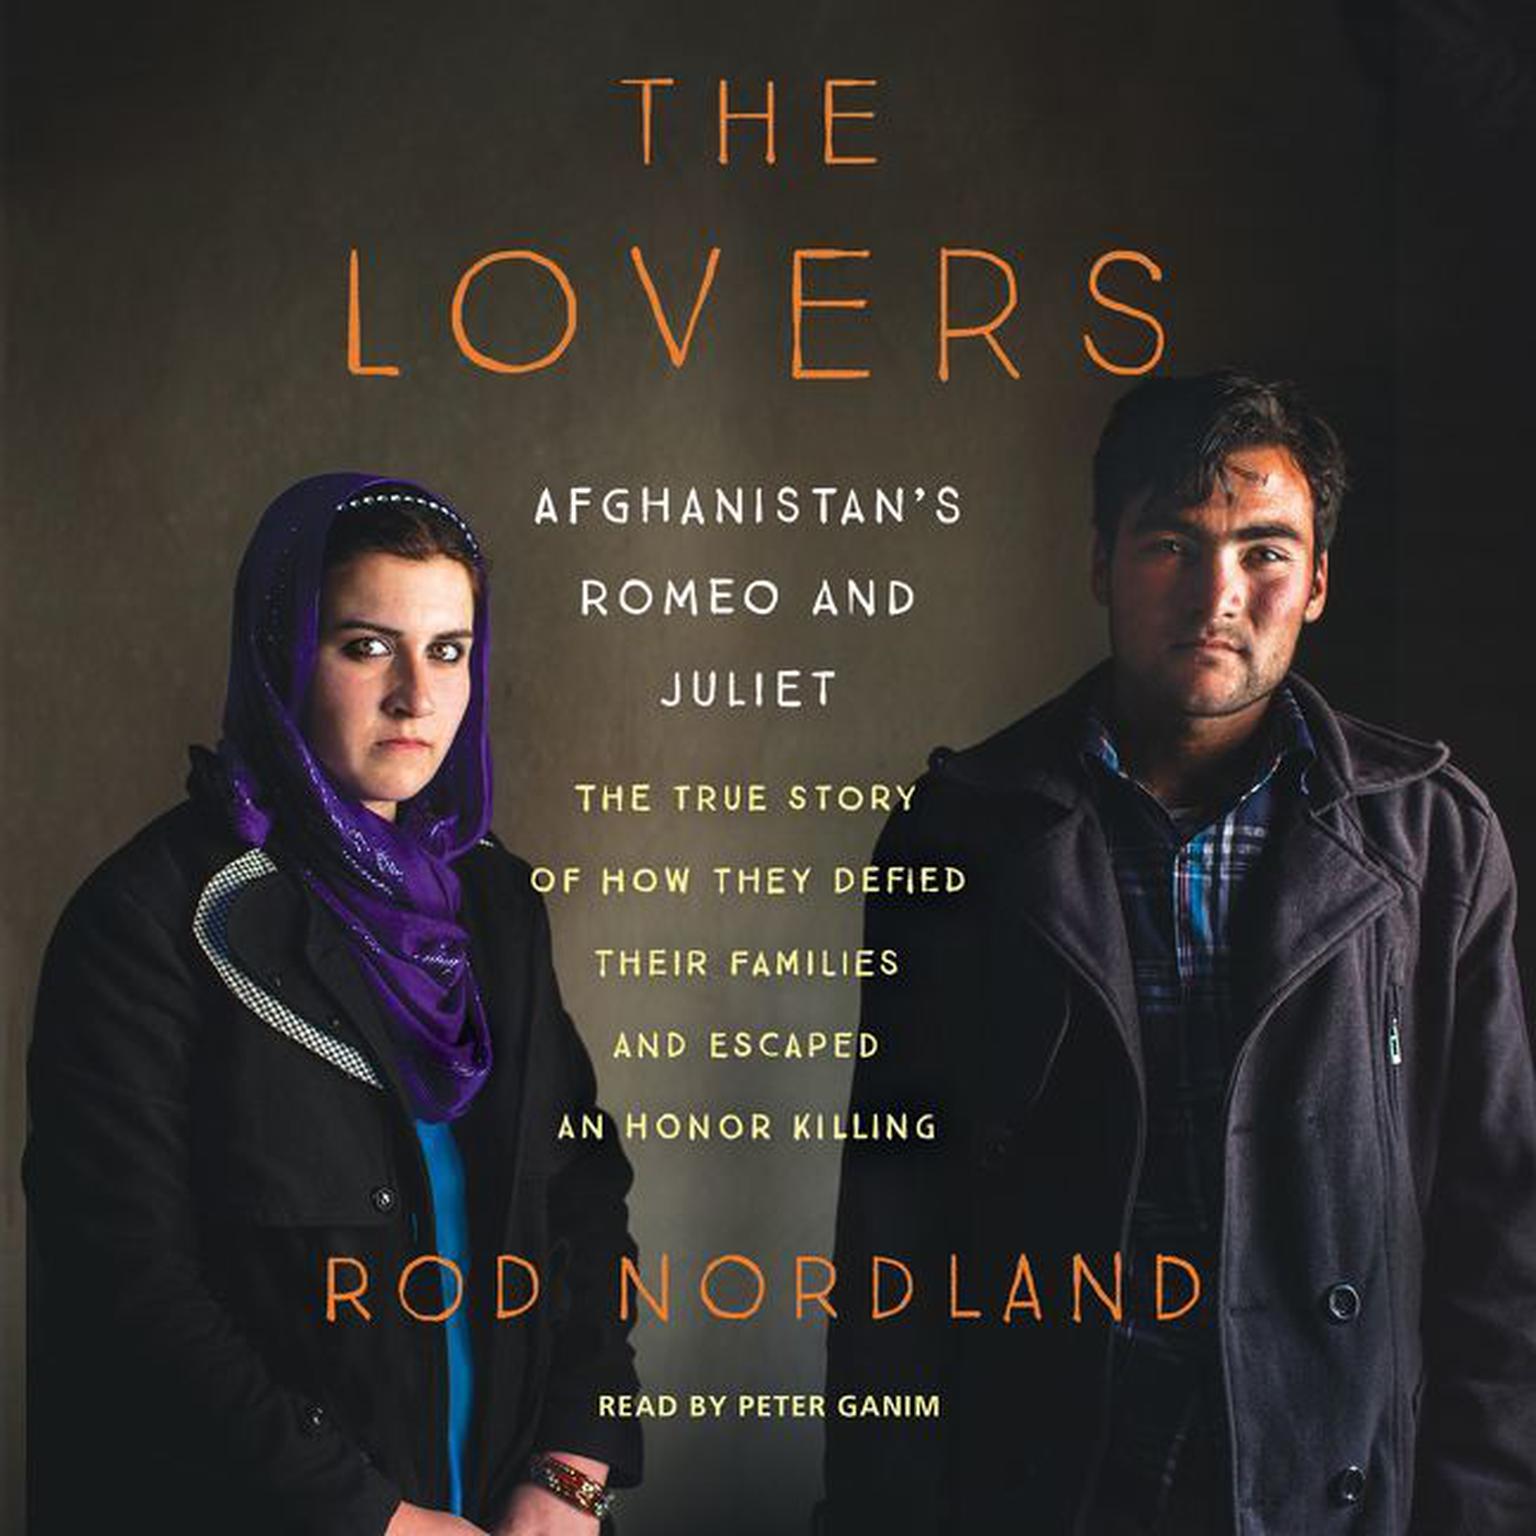 The Lovers: Afghanistans Romeo and Juliet, the True Story of How They Defied Their Families and Escaped an Honor Killing Audiobook, by Rod Nordland